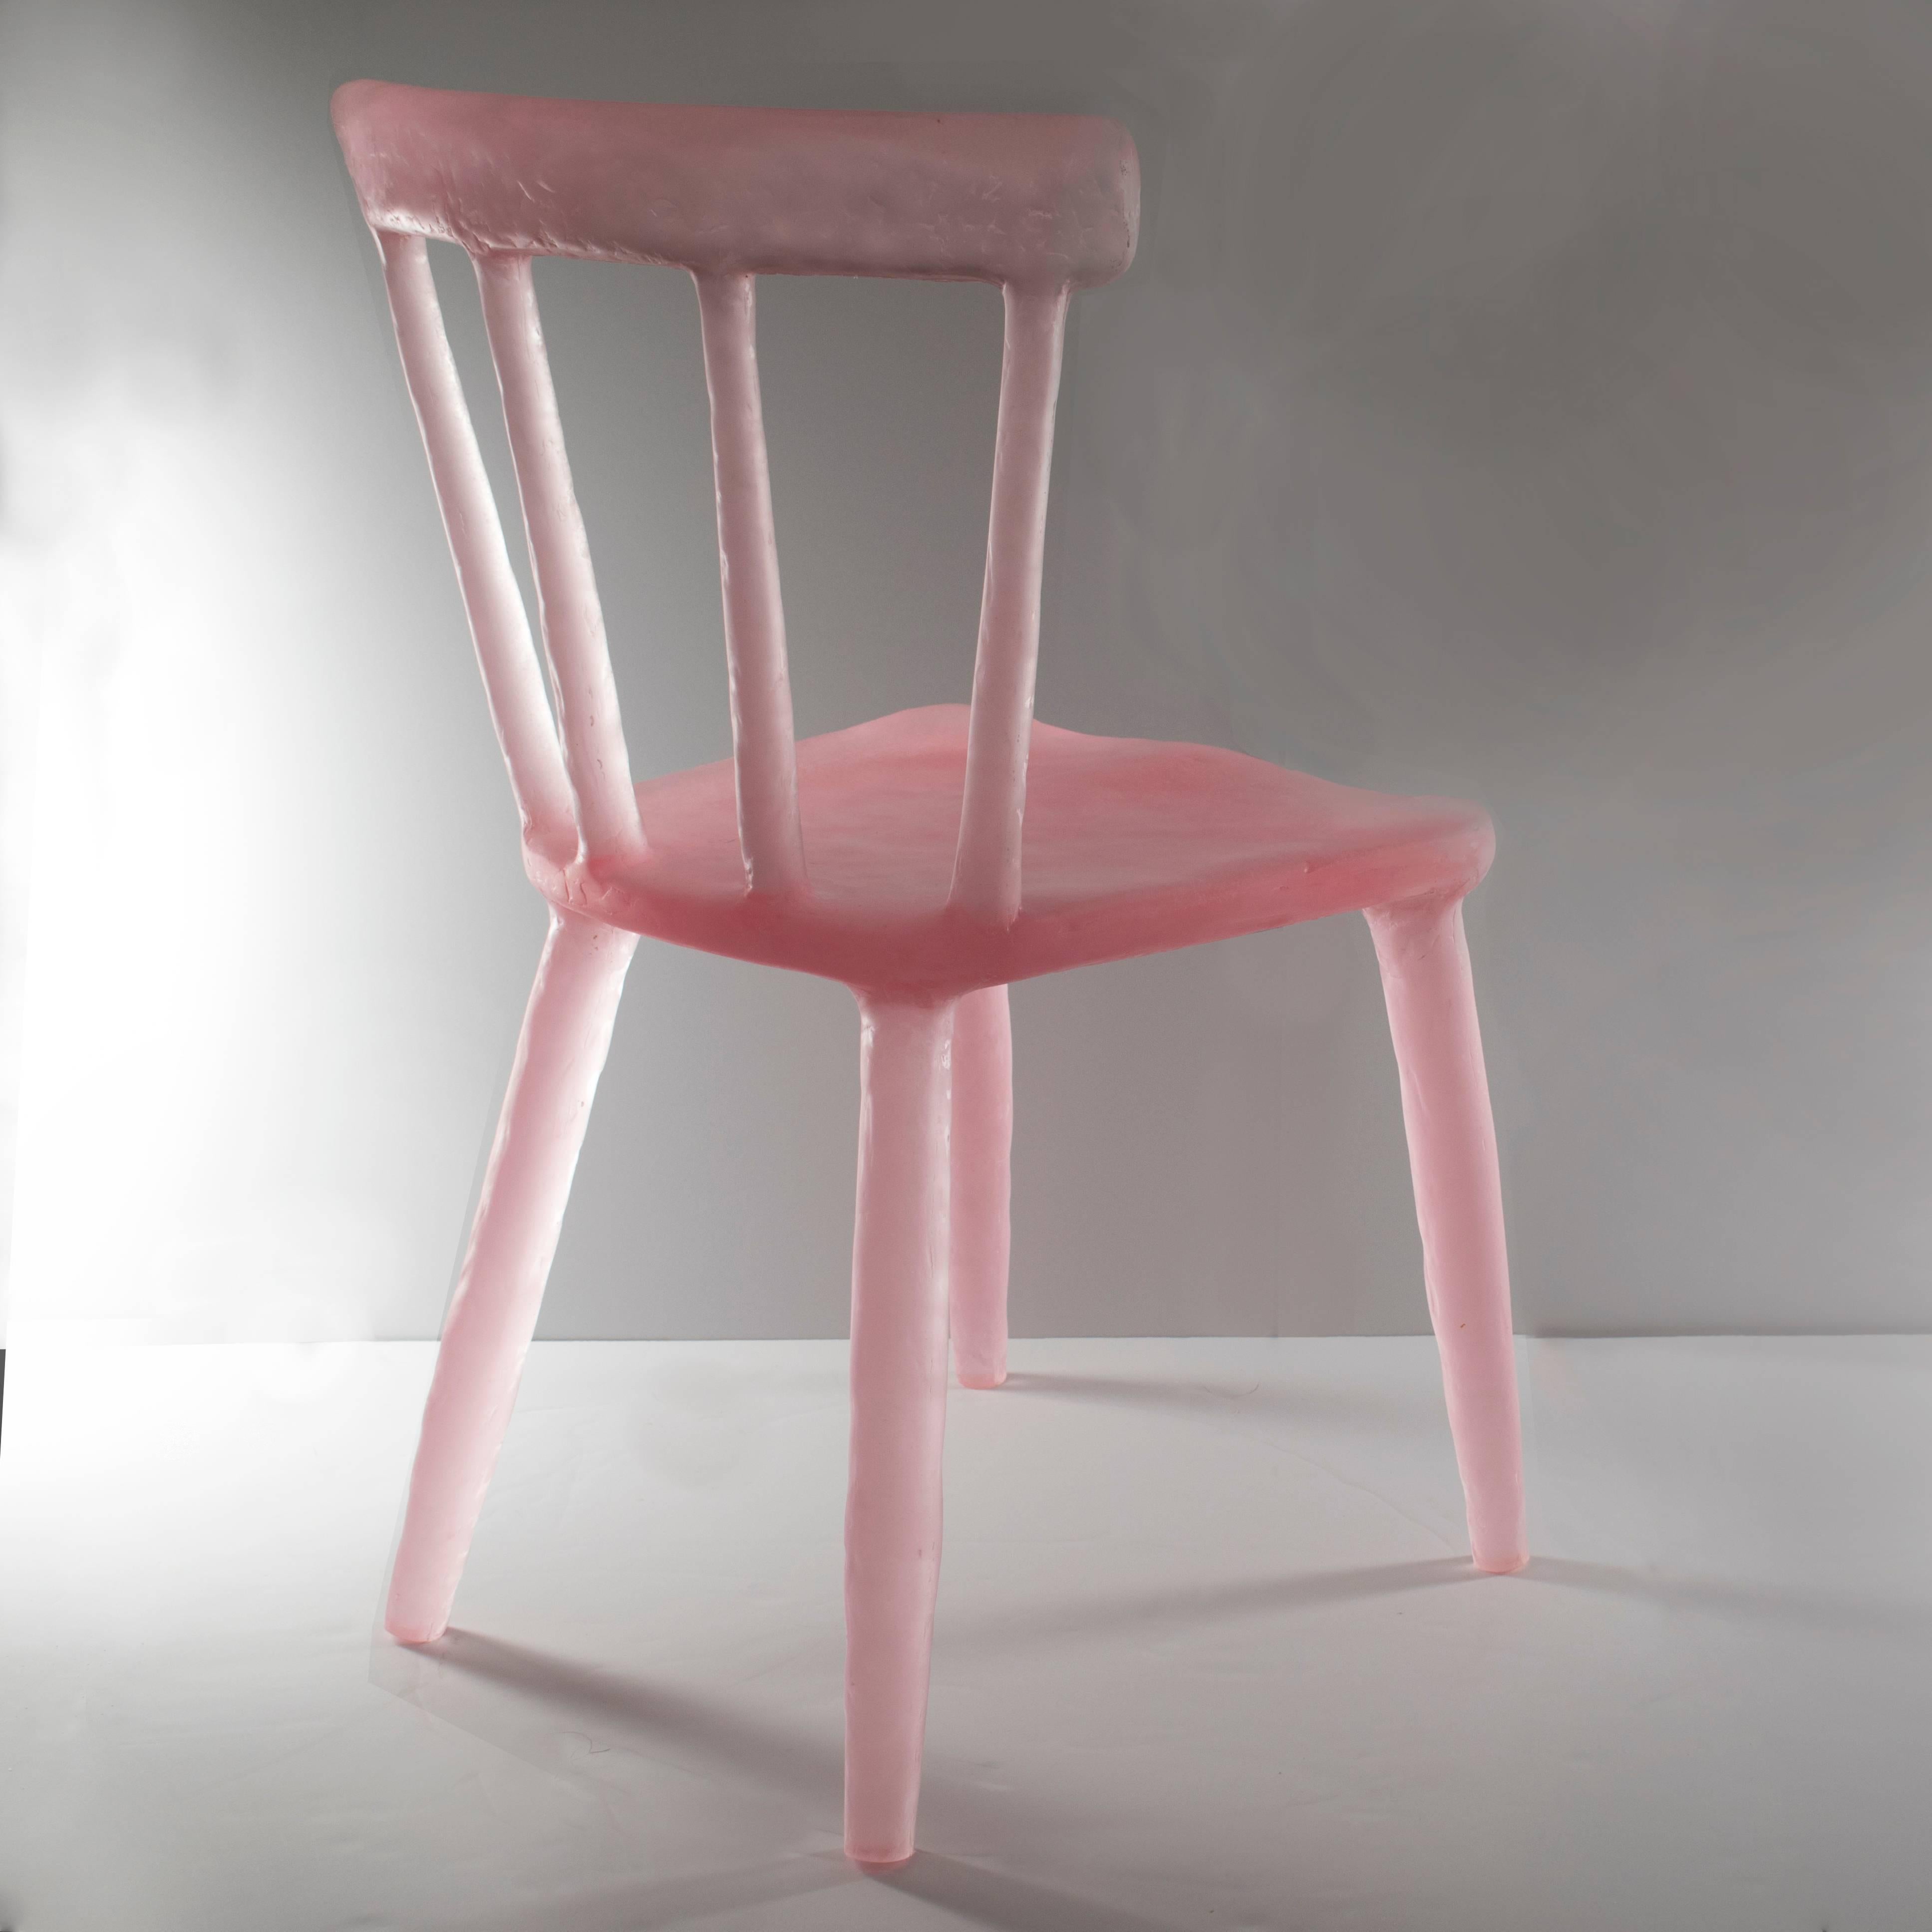 American Glow Chair by Kim Markel in Pink, Handmade from Cast Recycled Resin / Acrylic For Sale